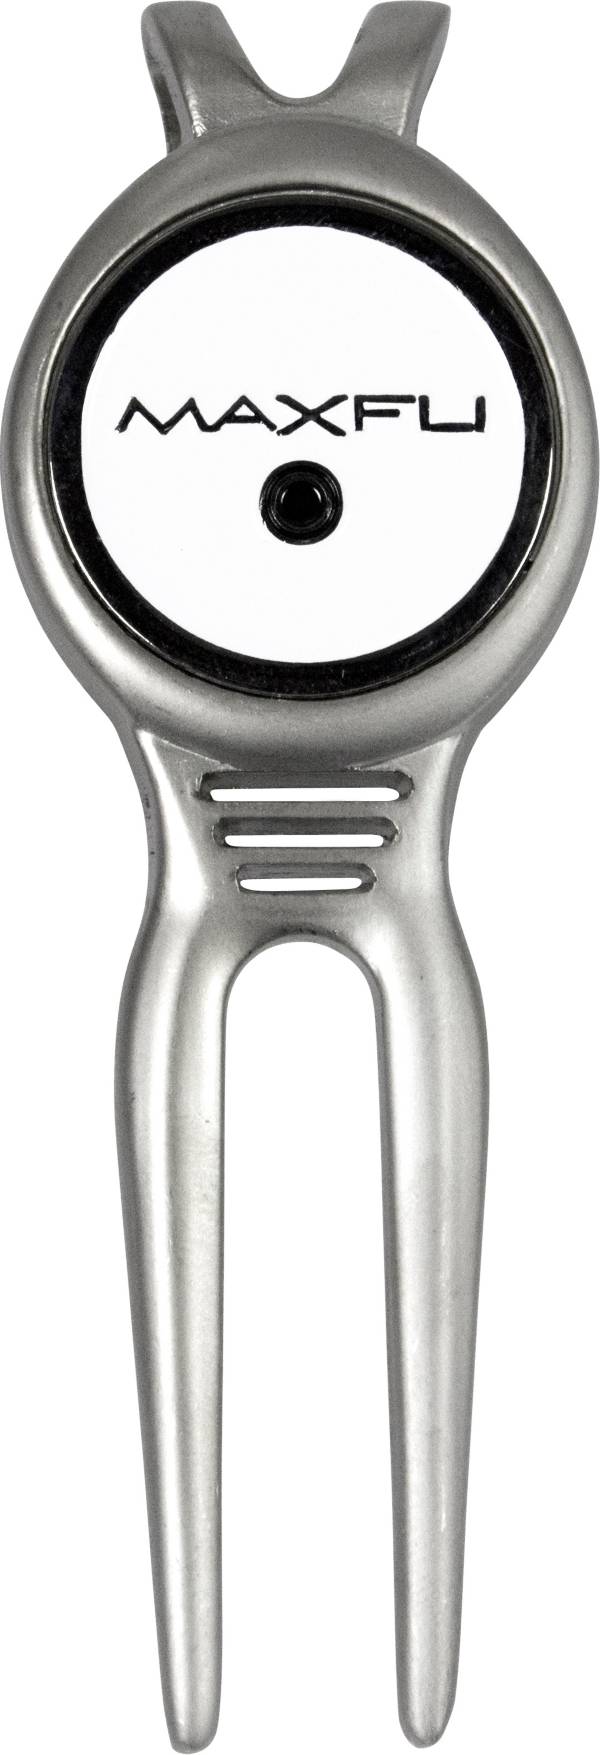 Maxfli Deluxe Divot Tool product image